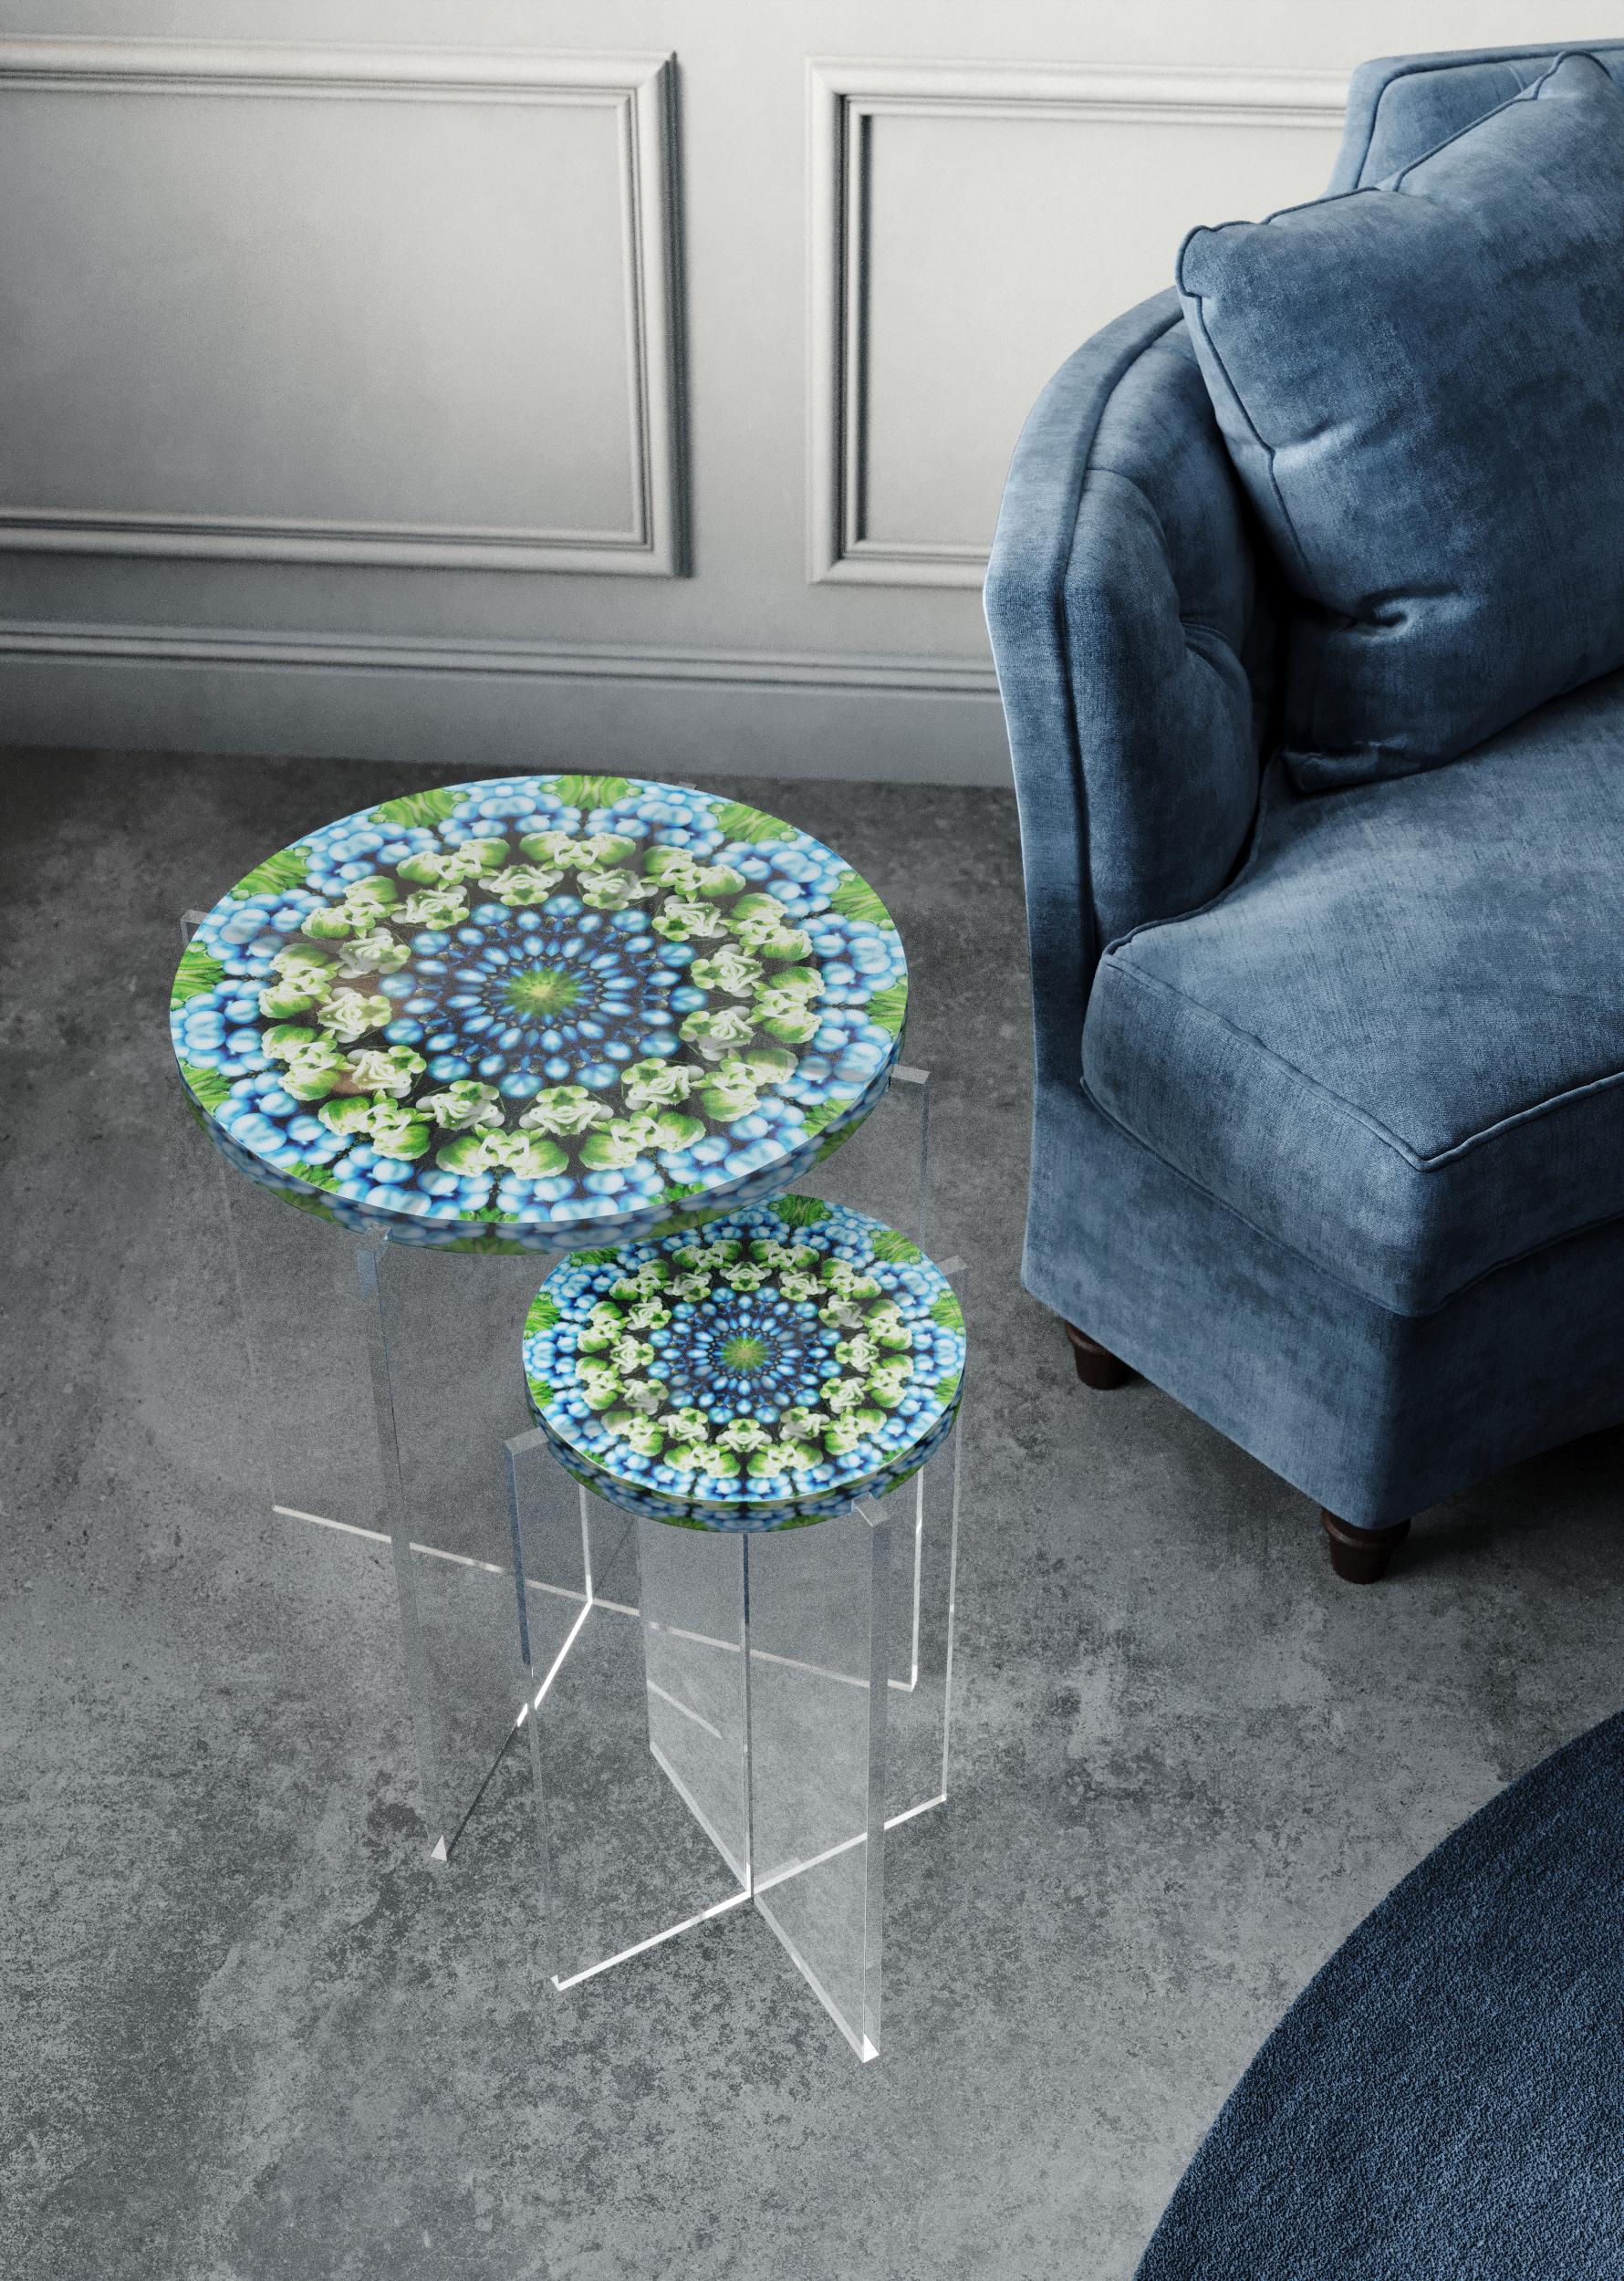 Mandala ‘bouquet tables’ bring a burst of colour & spiritual optimism. Designed by luxury lifestyle brand JG Home, these unique bouquet mandala tables flood any urban setting with a burst of floral vibrancy. 
Made from high quality PVC, the modern